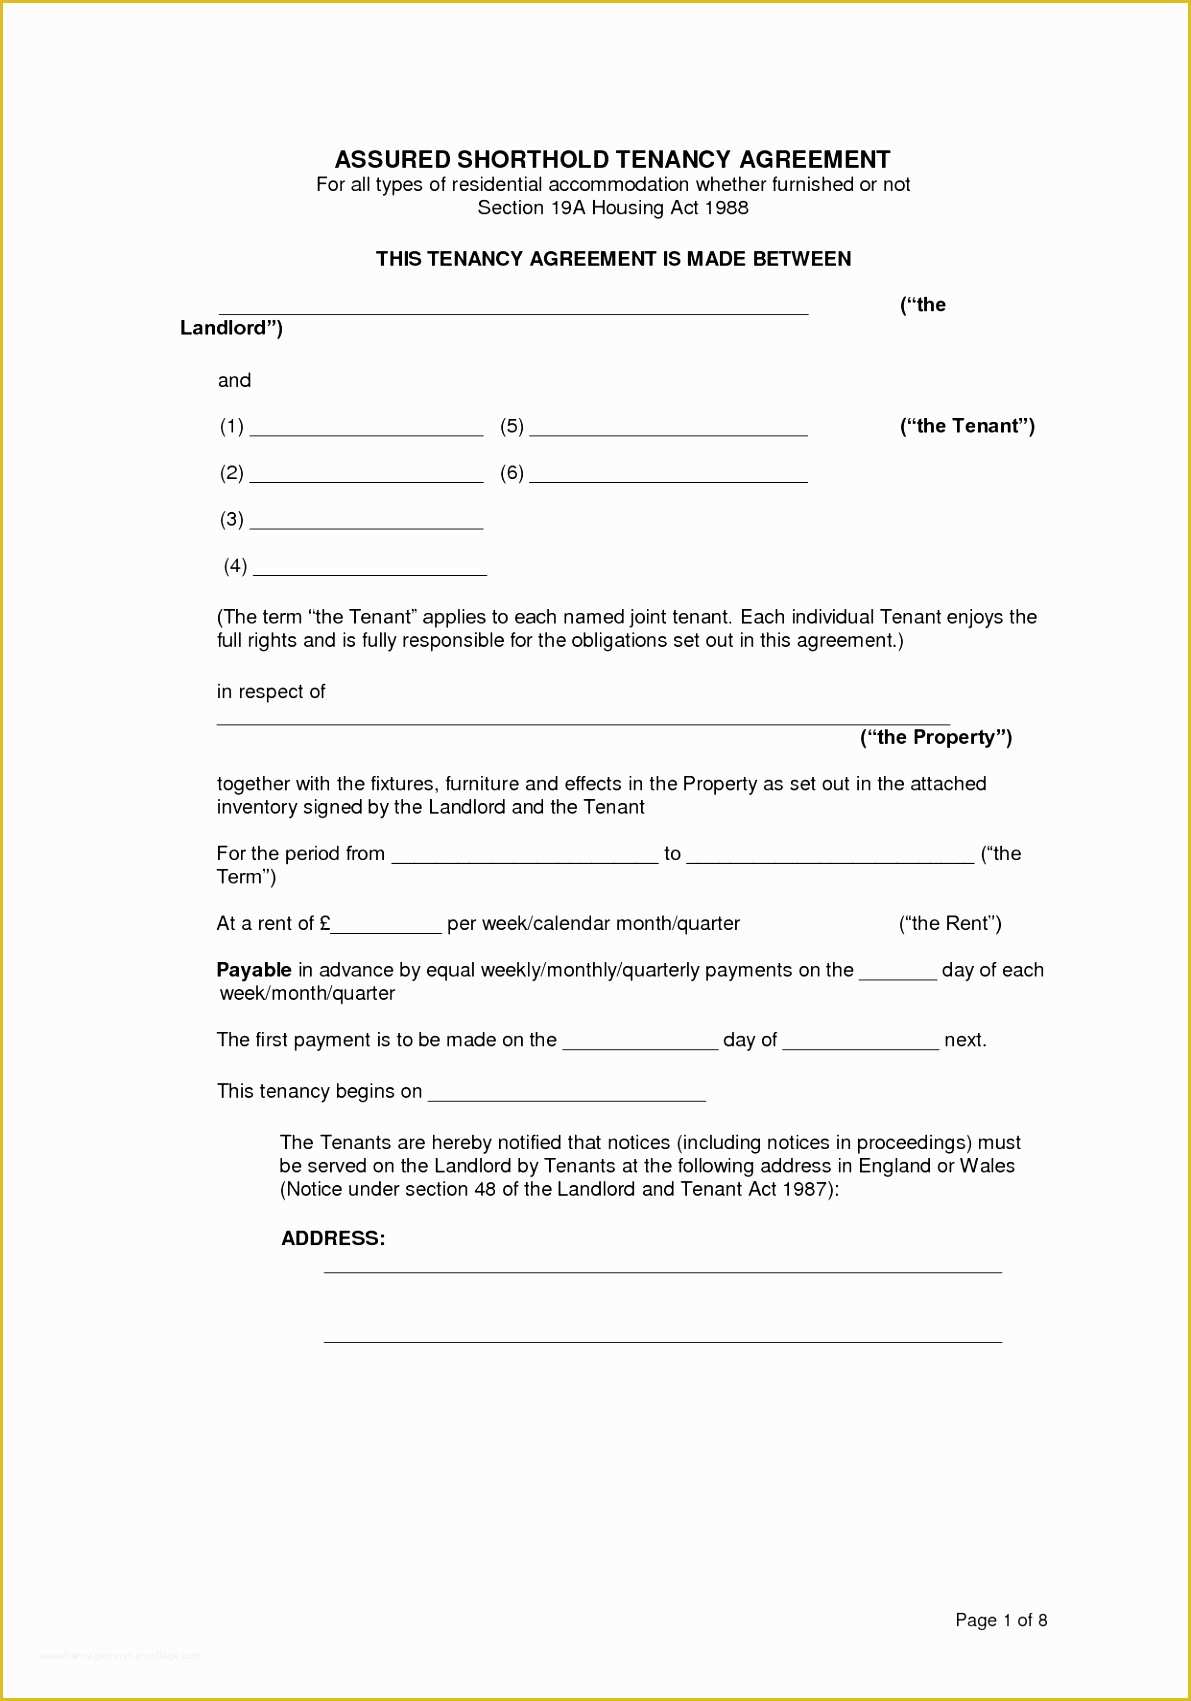 Tenancy Agreement form Template Free Of 9 ast Tenancy Agreement Template Rieta